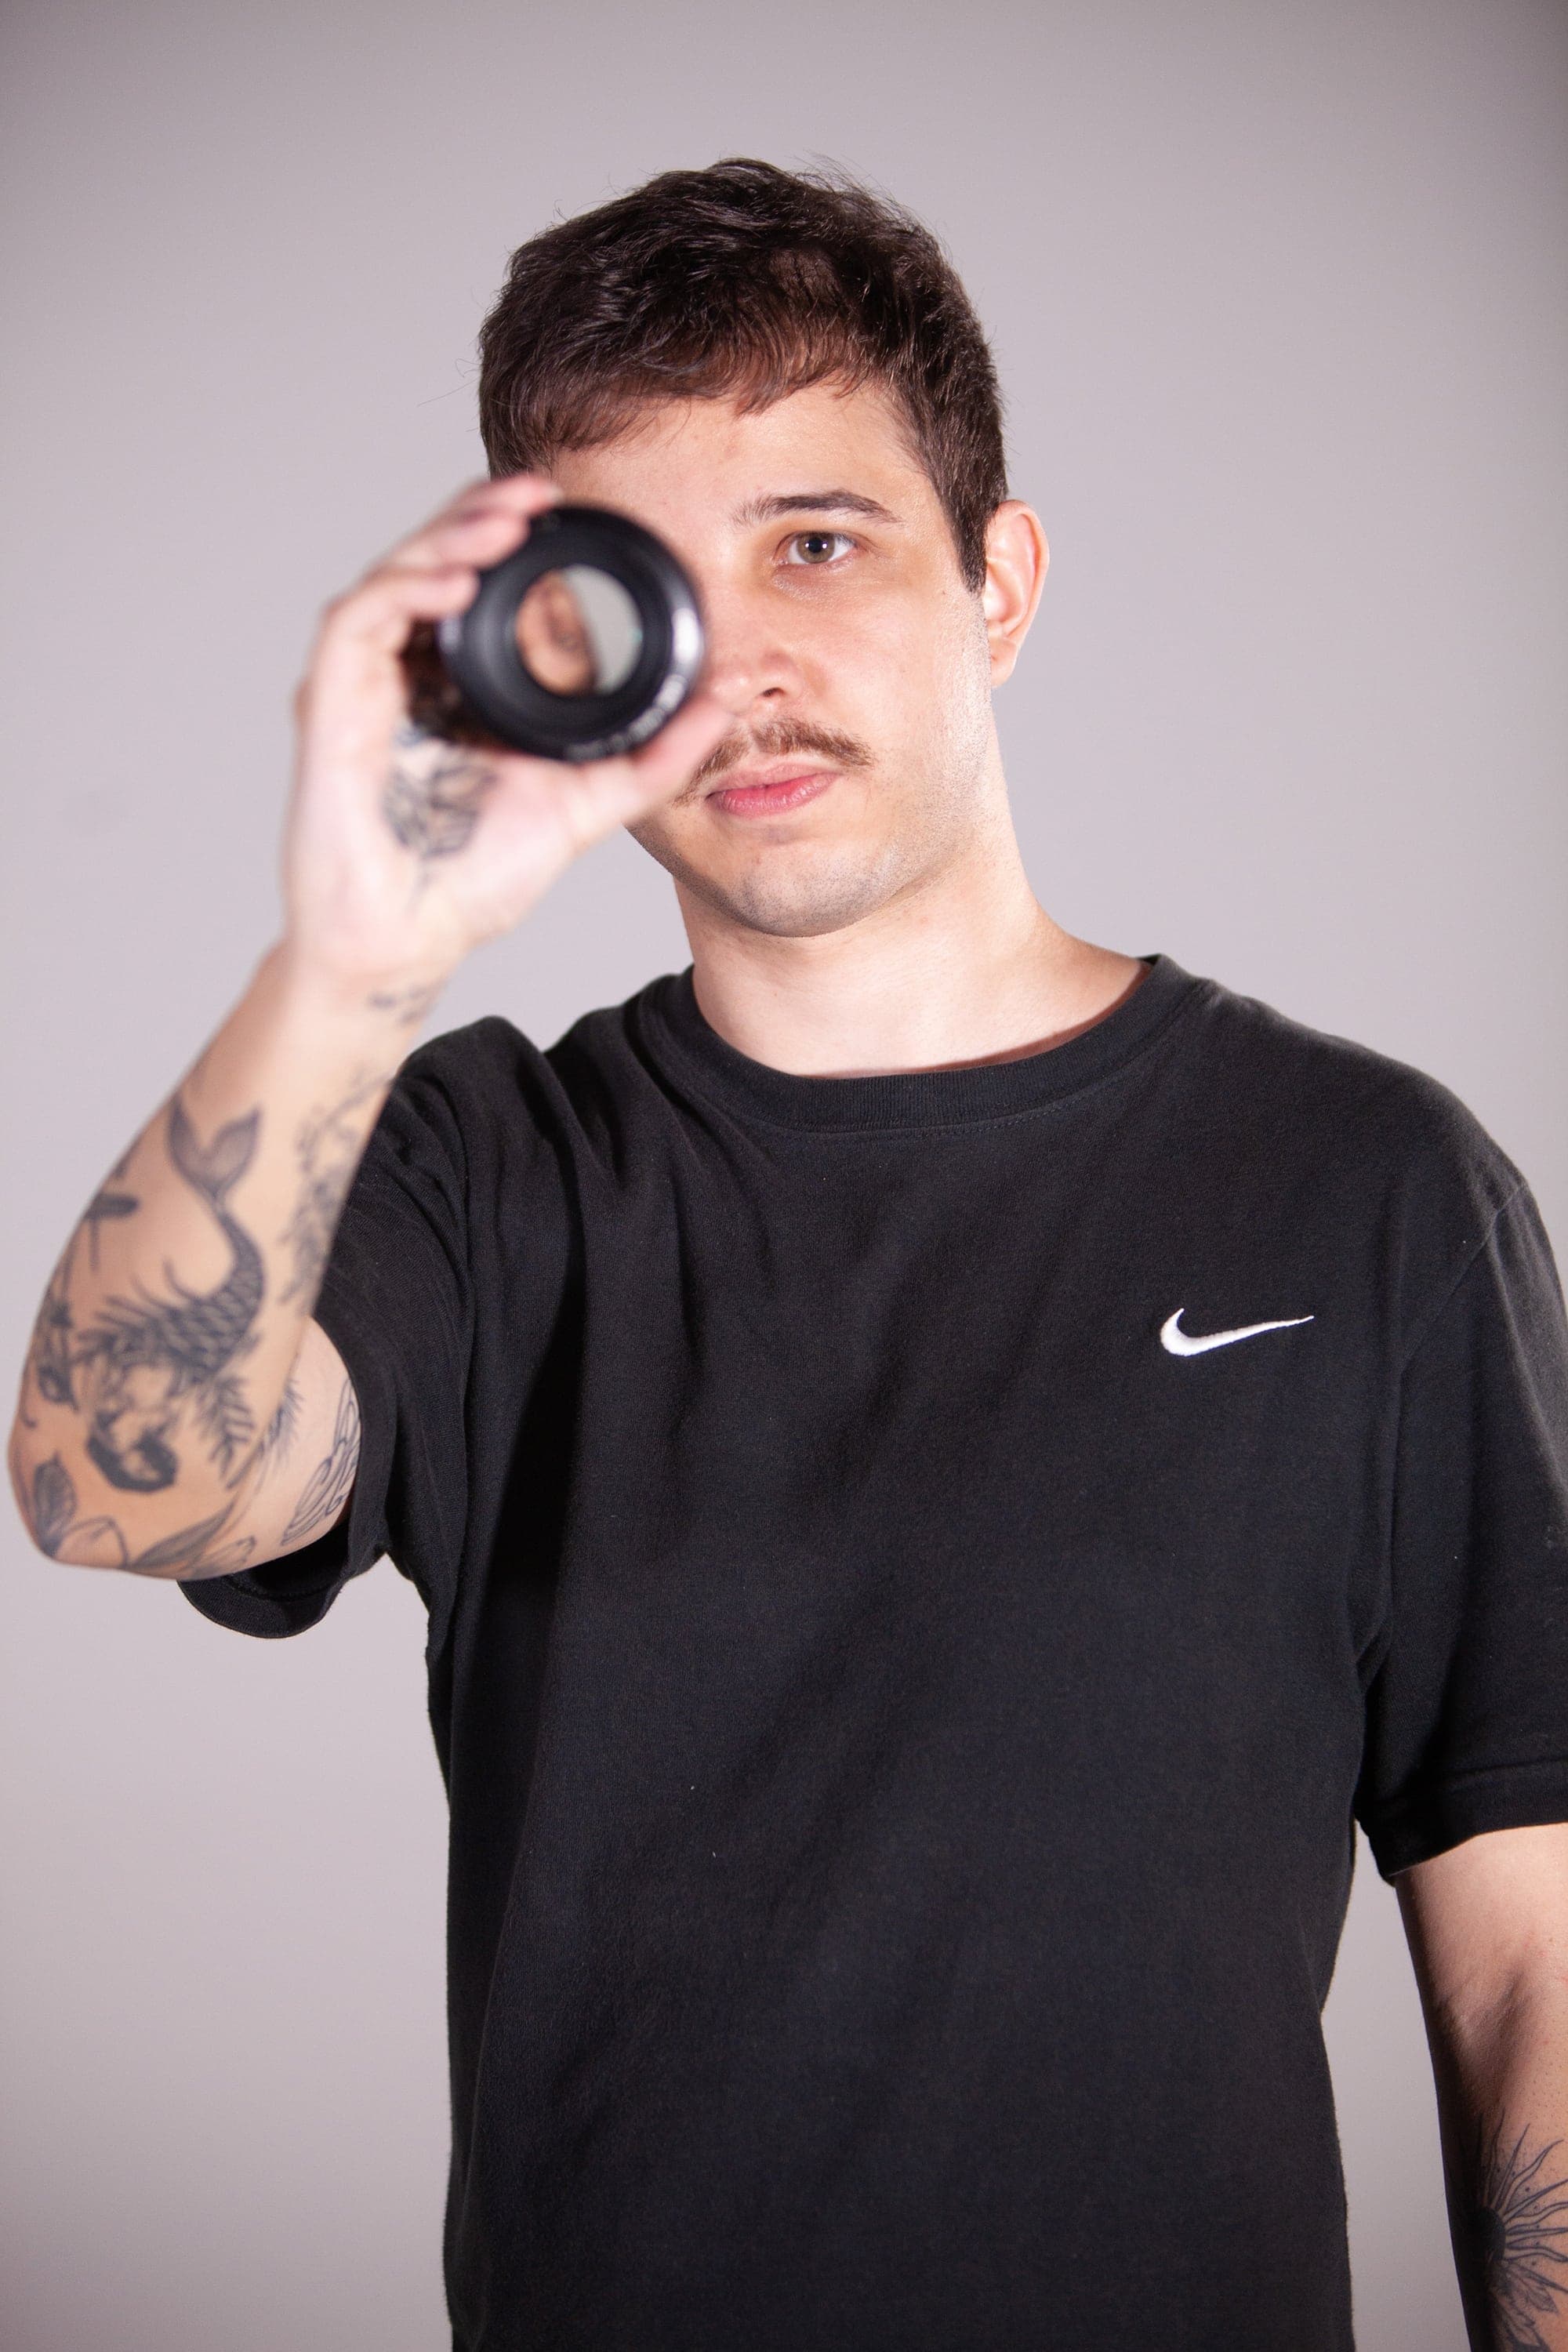 Matheus Stolf | Assistant Director of Photography